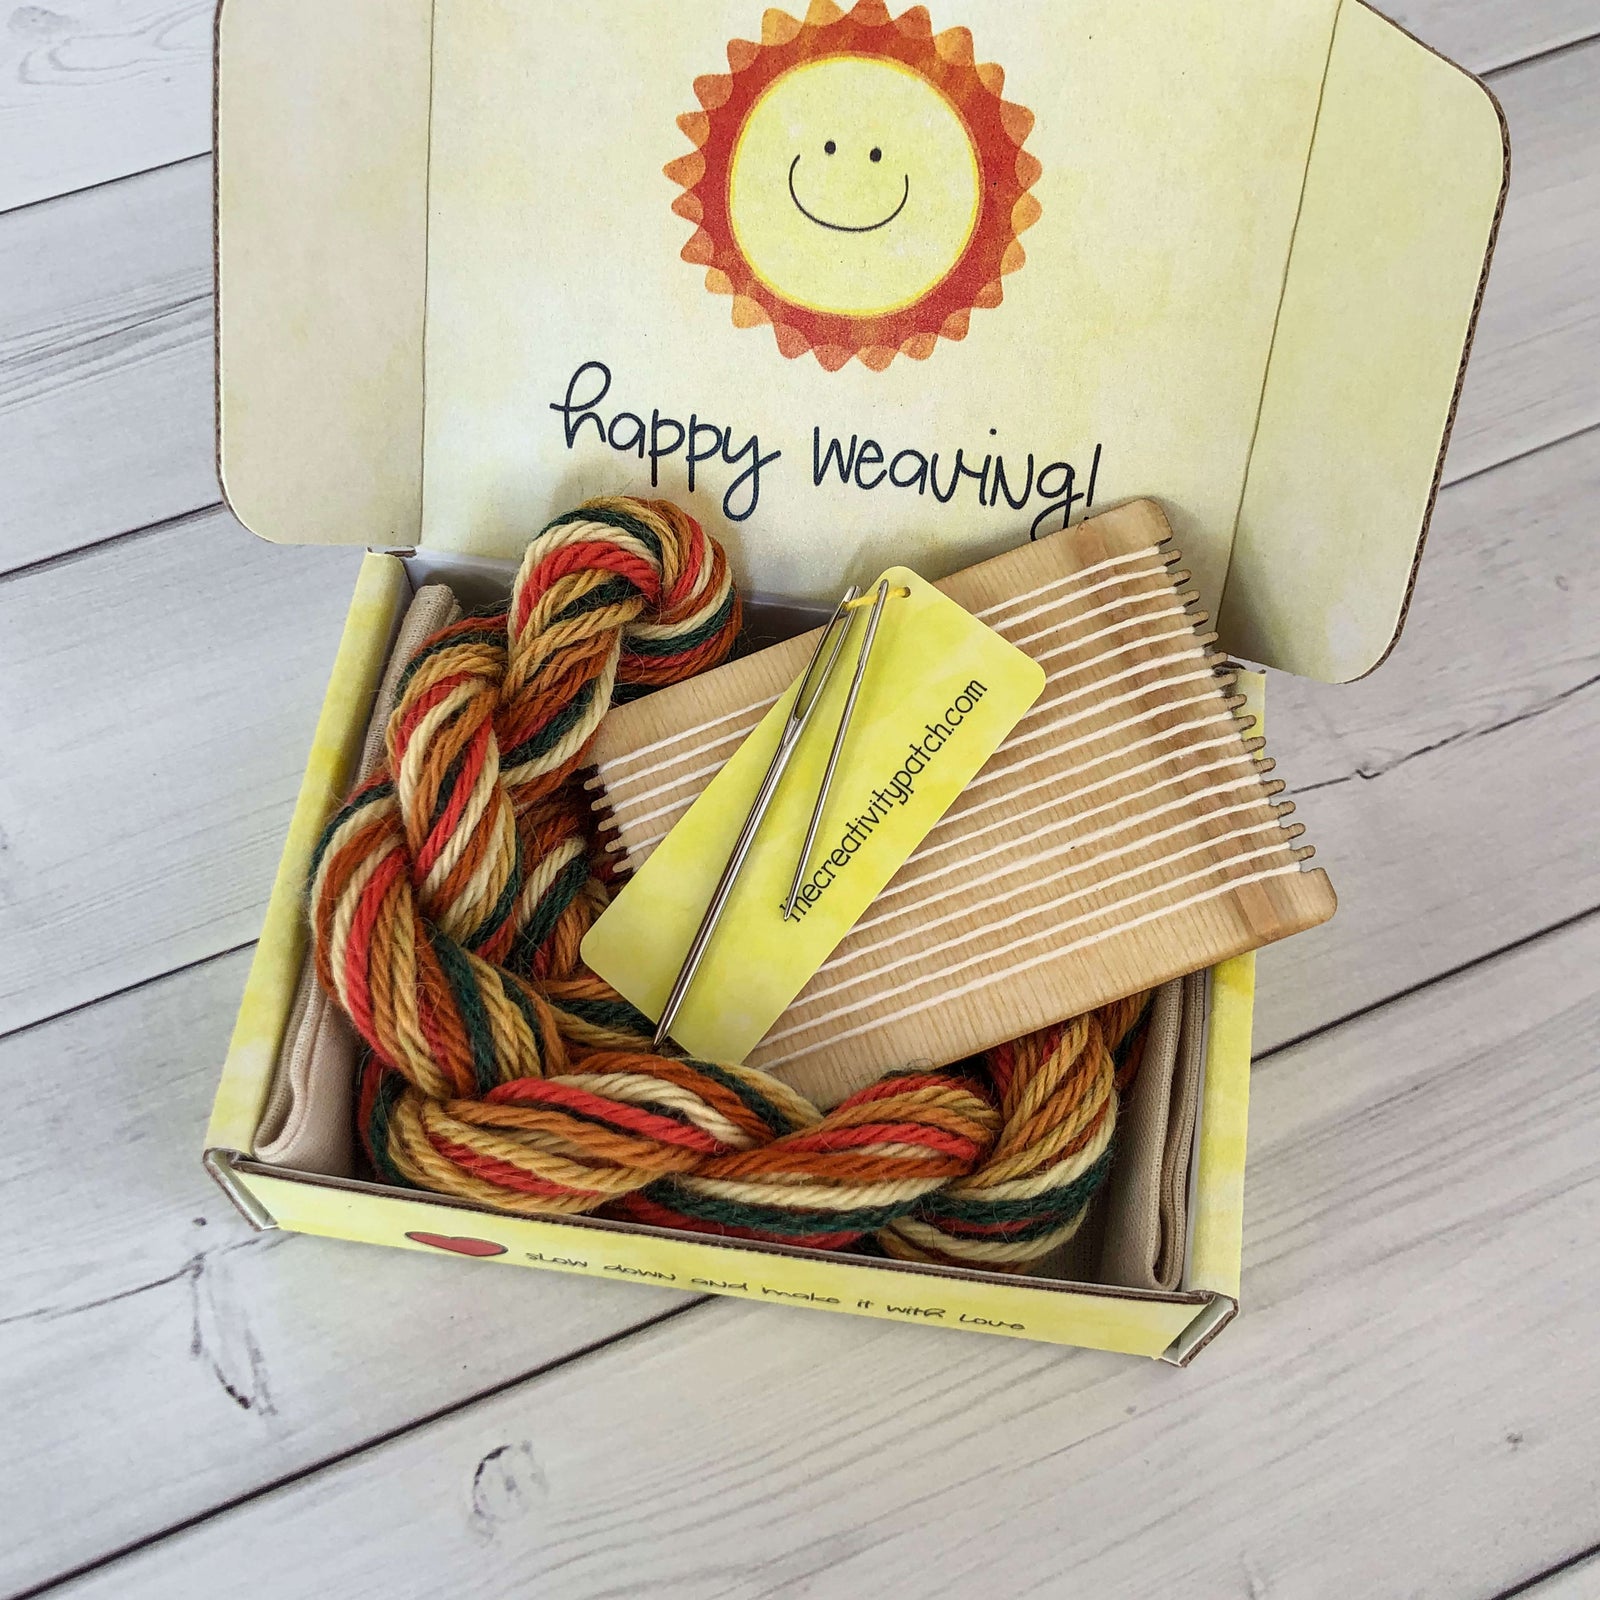 Teeny loom for easy on-the-go crafts. Be creative anywhere — boomloom